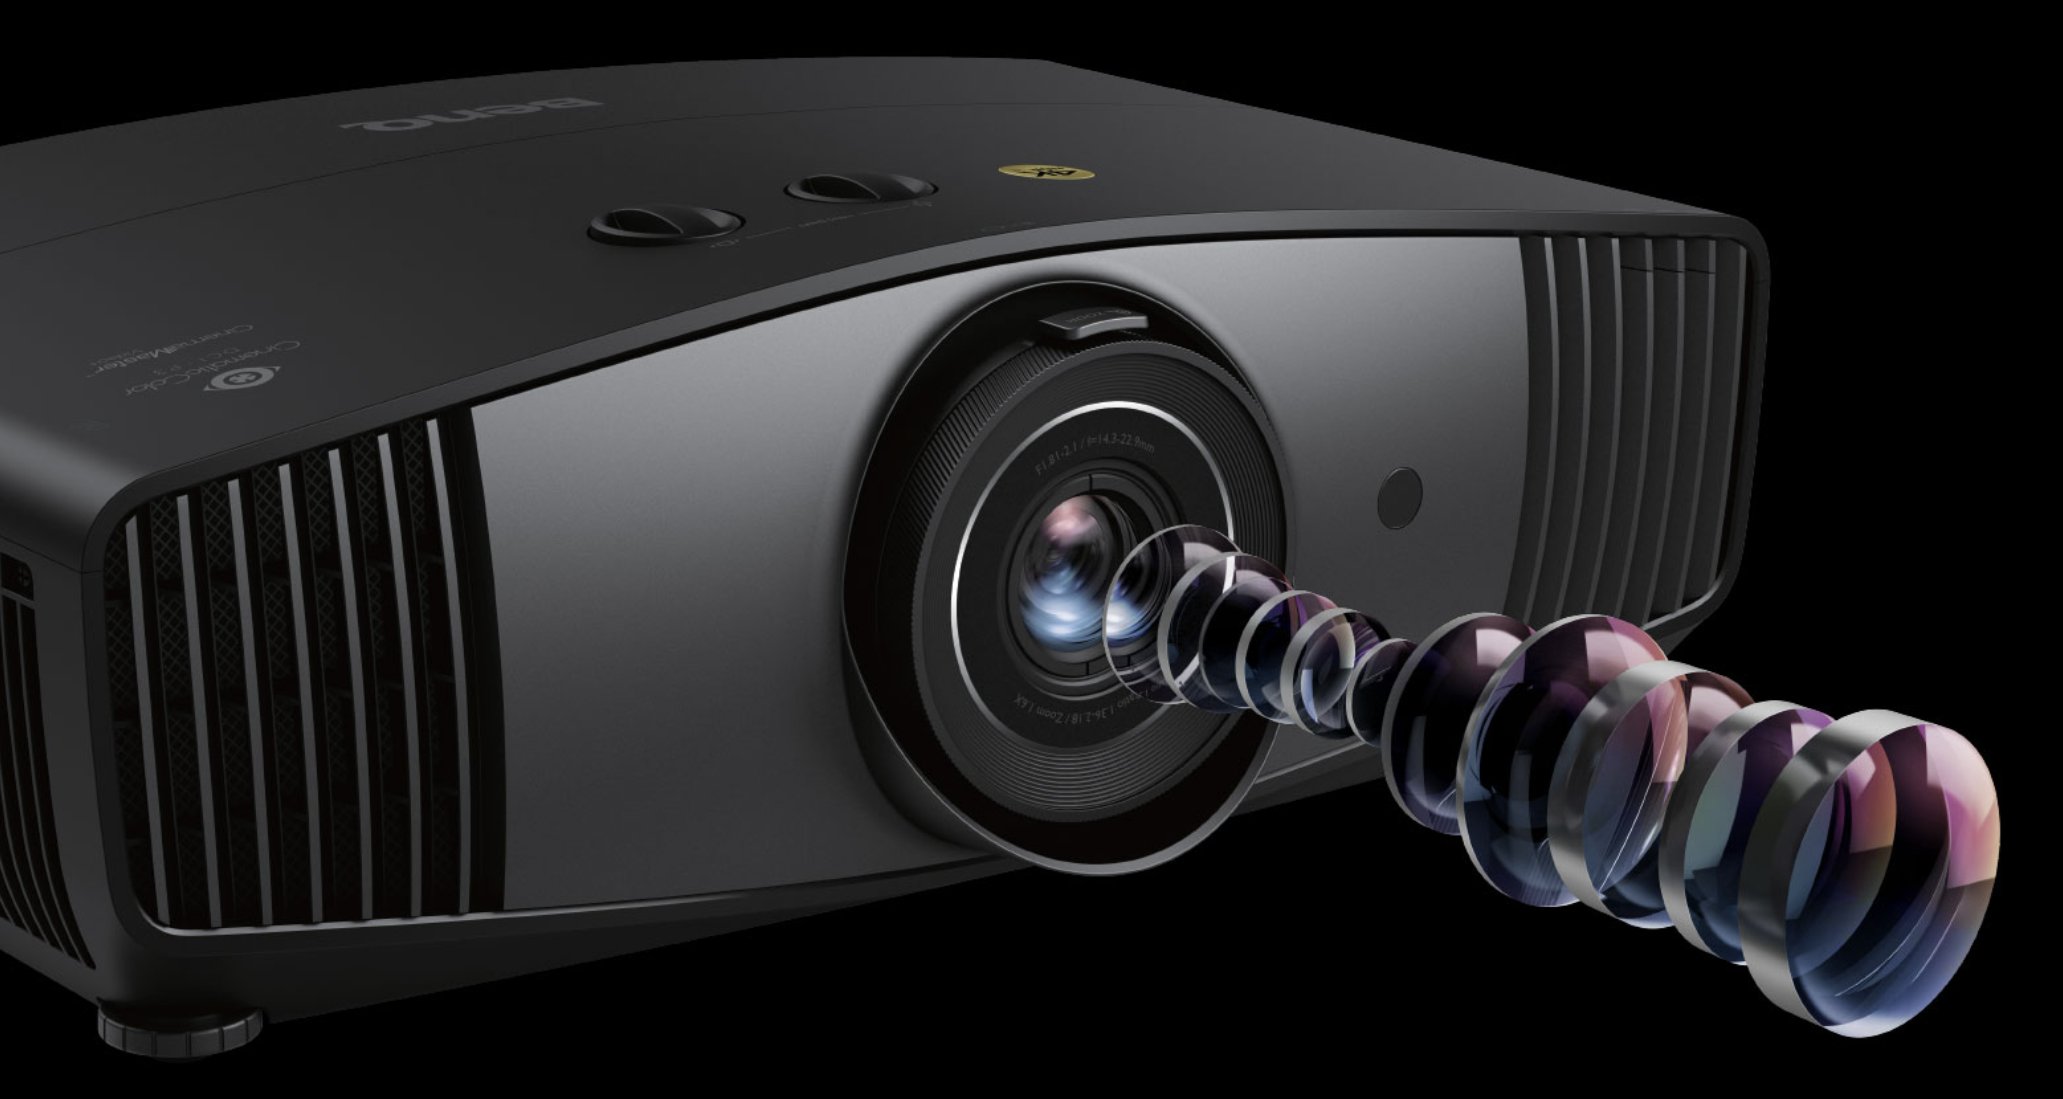 BenQ HT5550 the best alternative to the Epson HB5050 for a dedicated 4K home theater projector